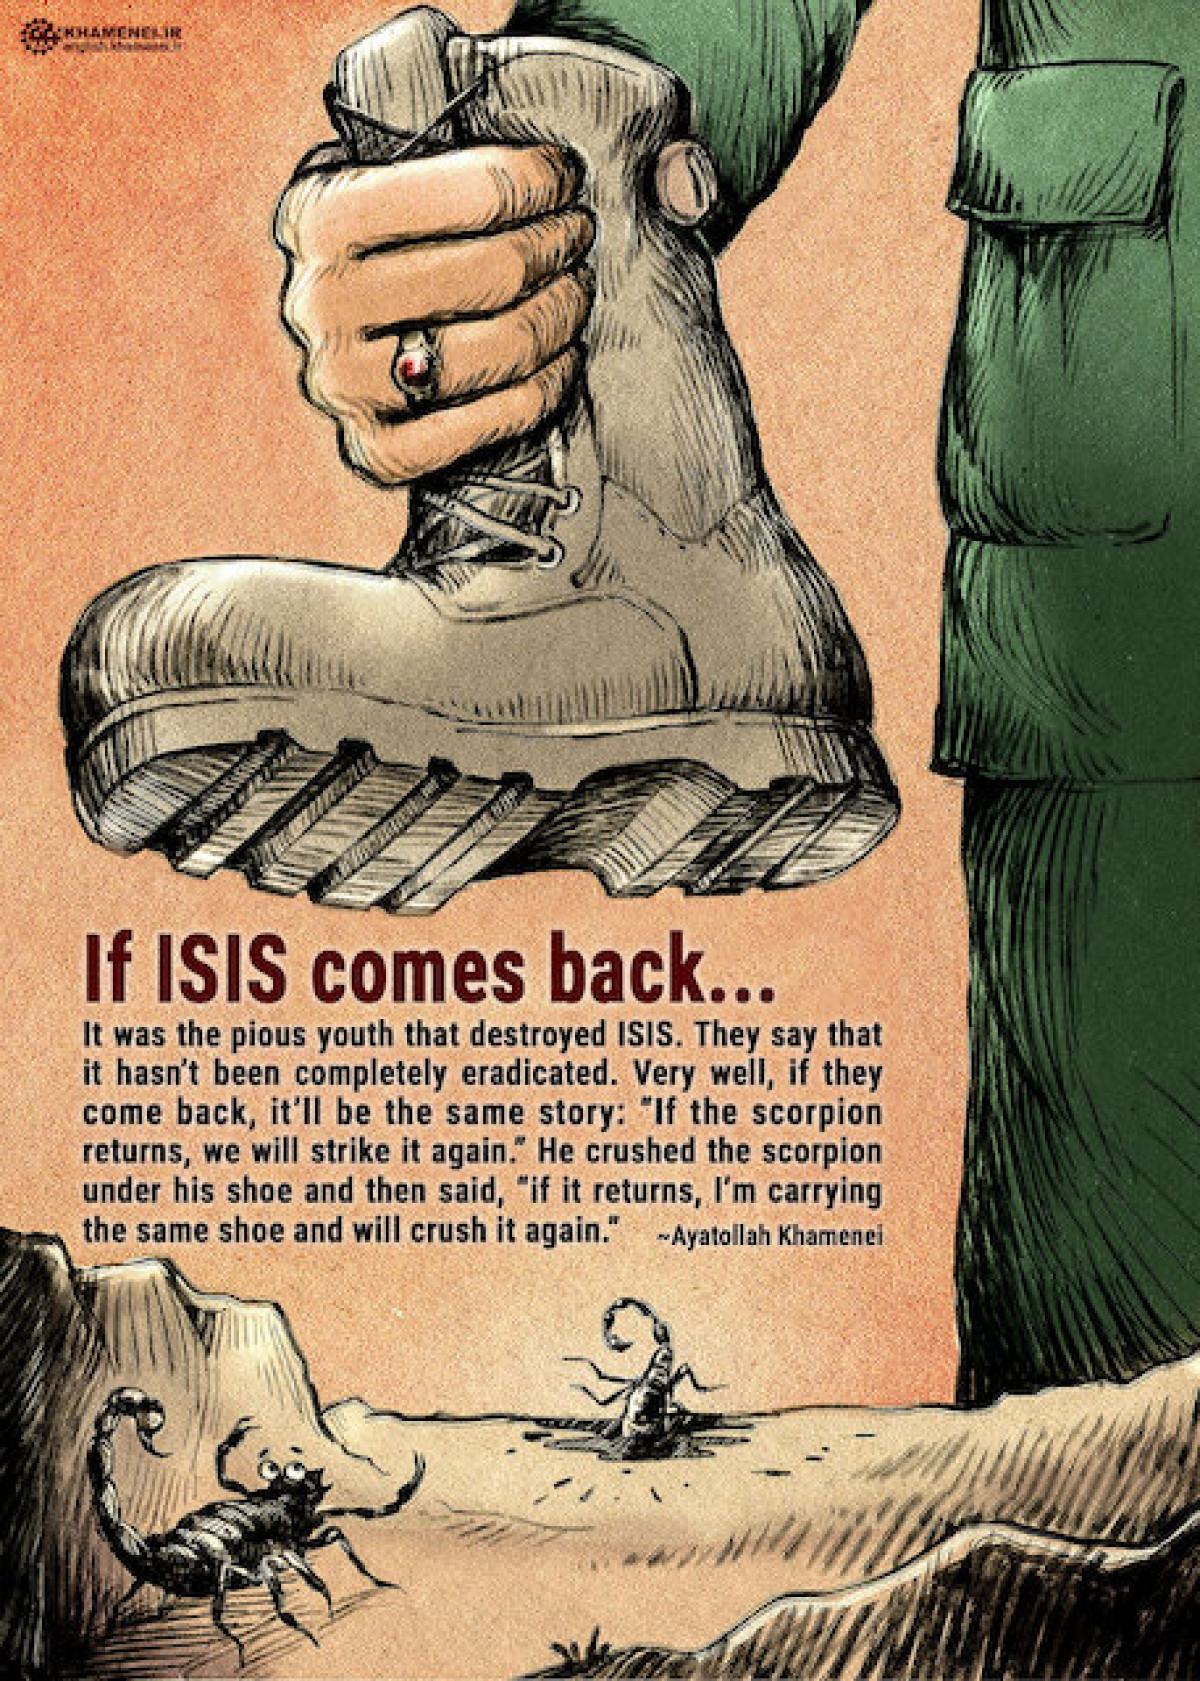 If ISIS comes back...